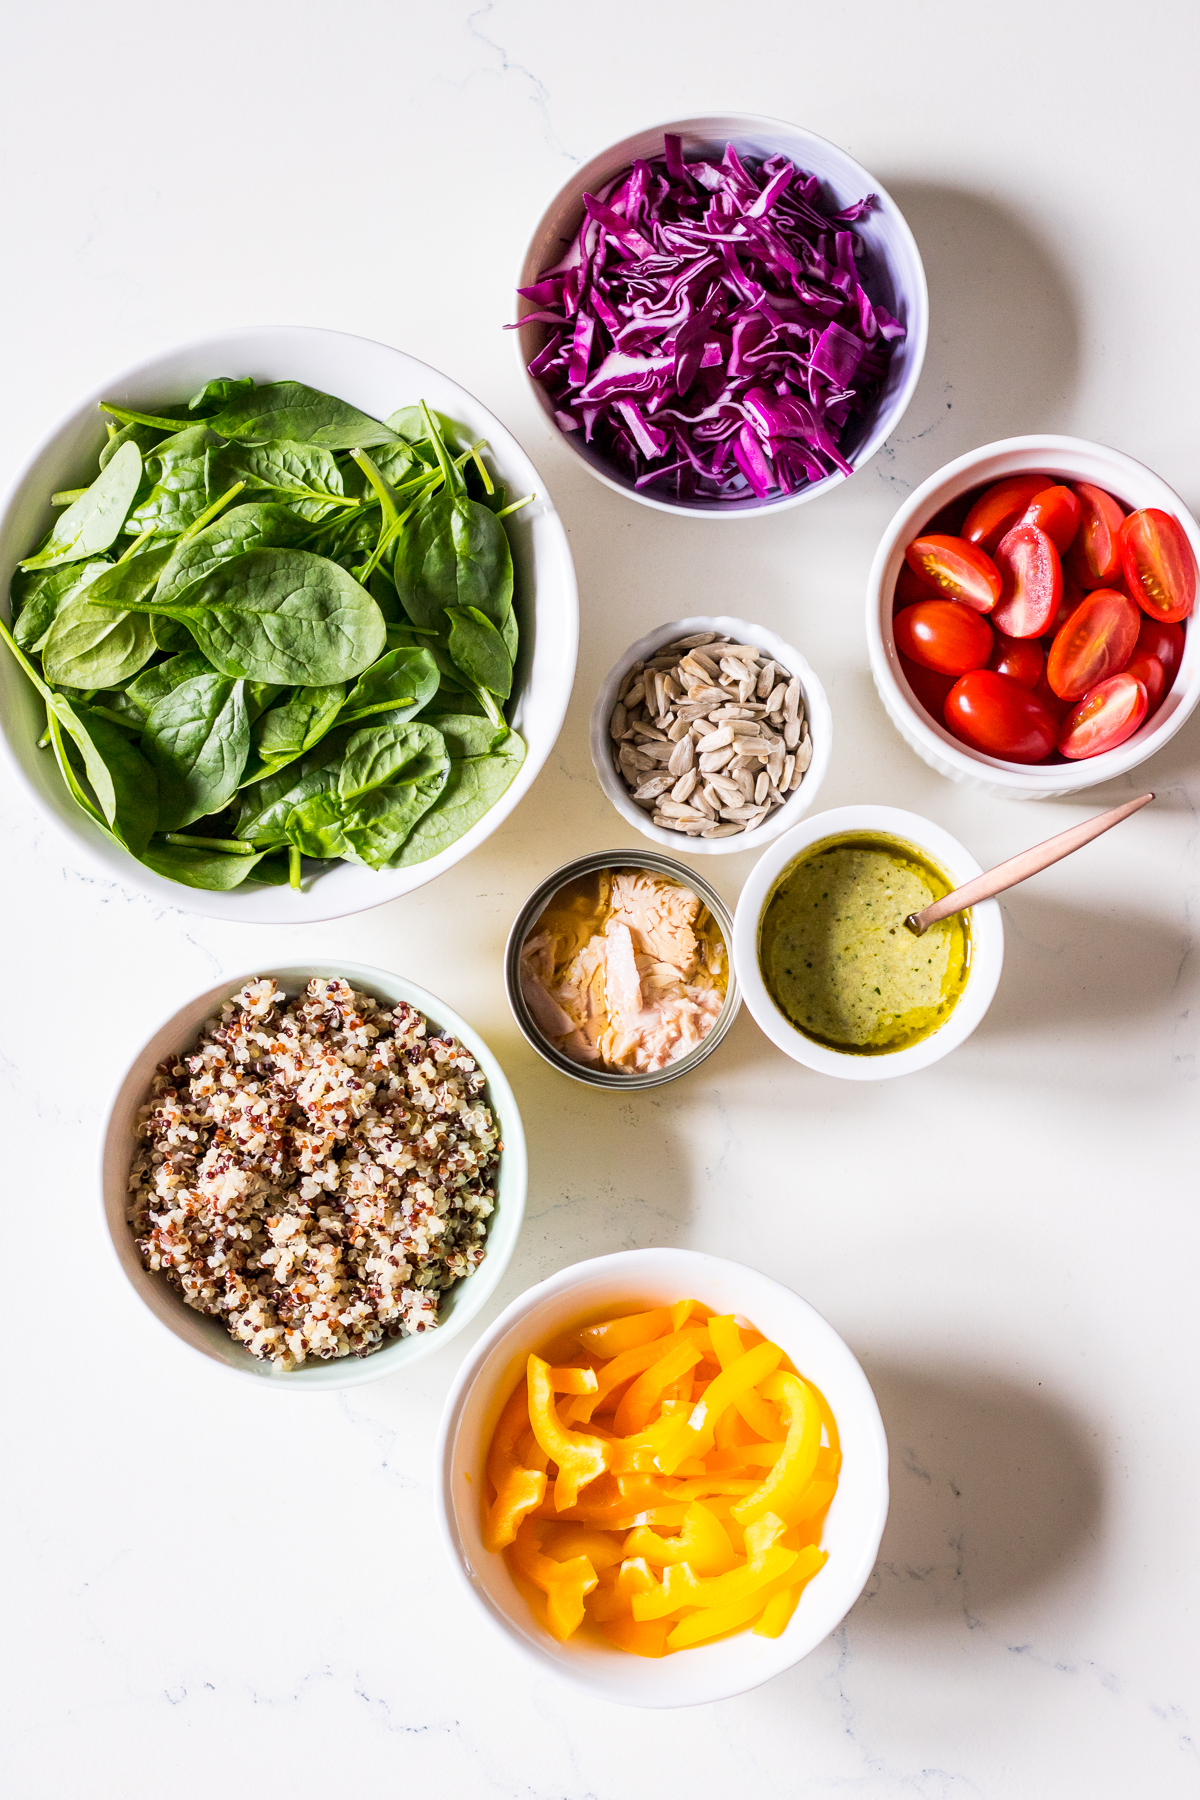 An image of ingredients for a salad arranged in individual bowls including vegetables, quinoa, tuna, seeds and pesto